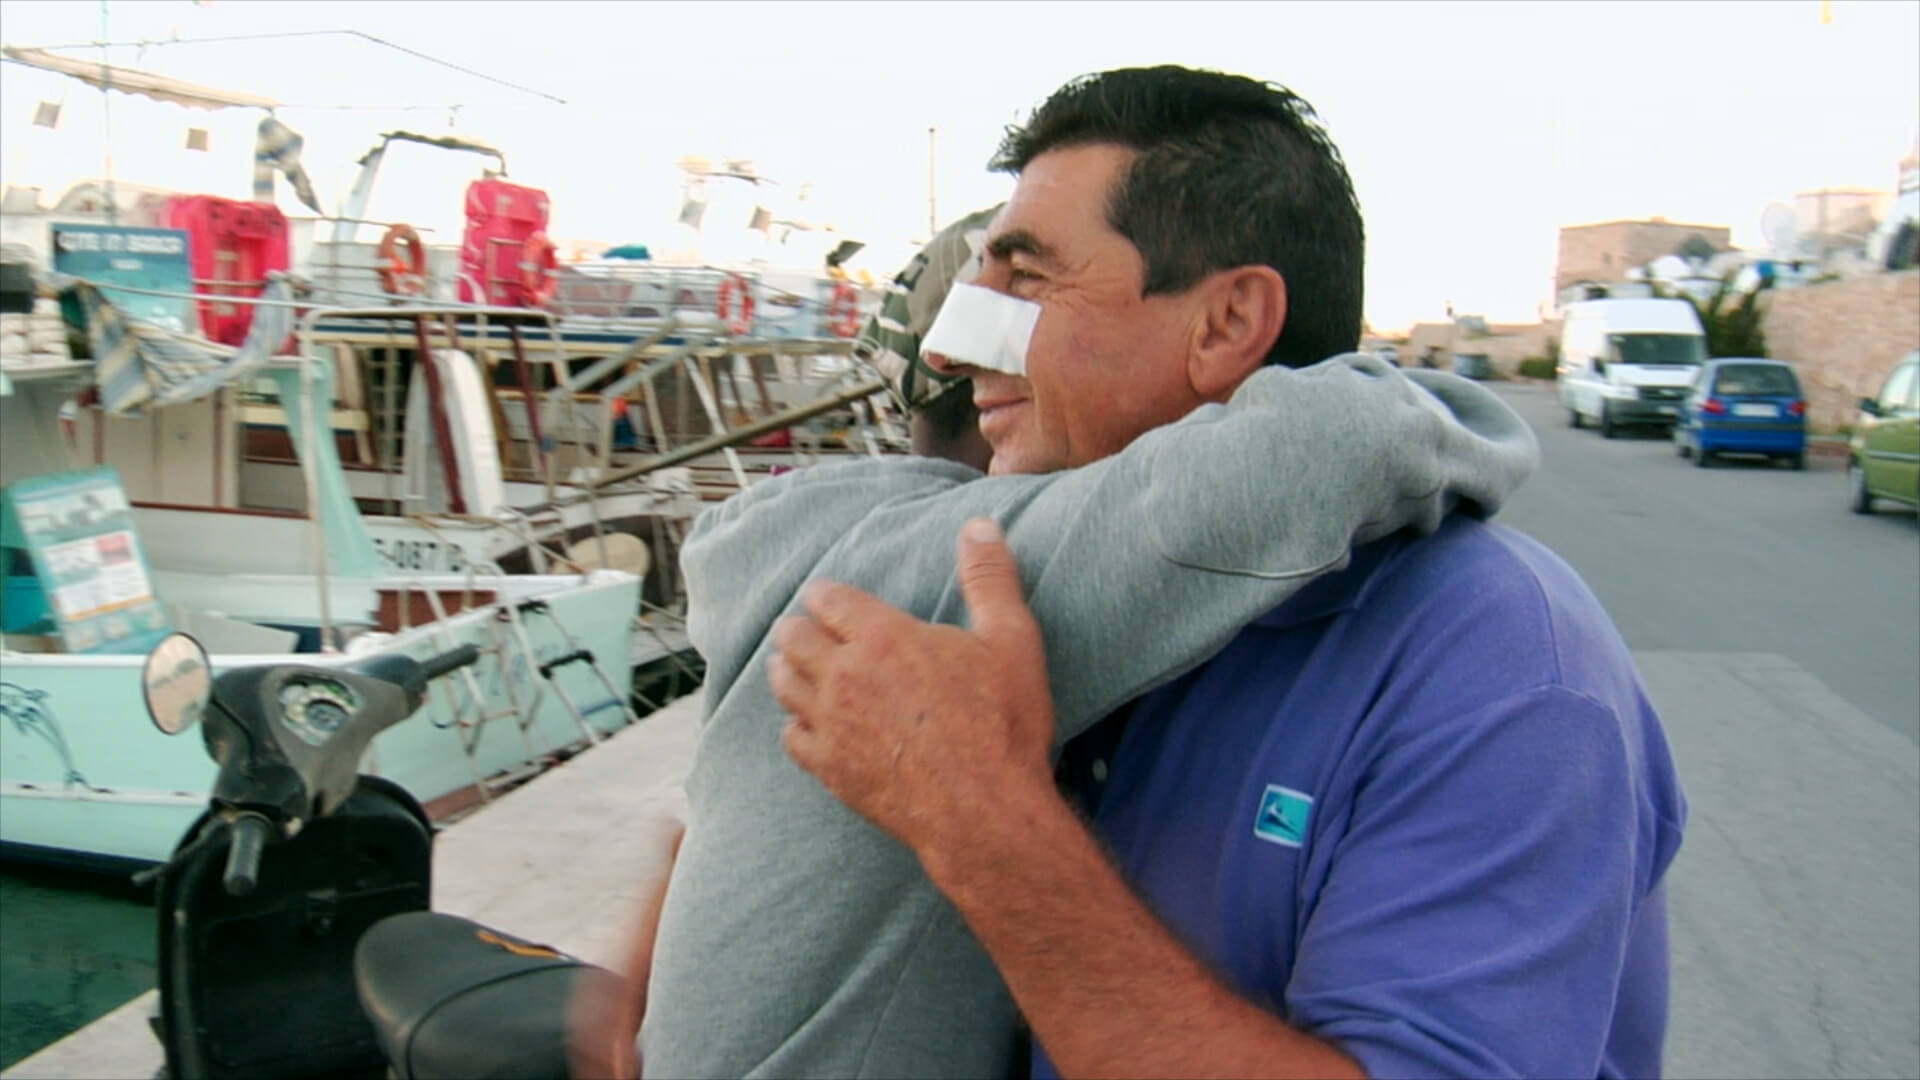 Still from It Will Be Chaos. Two people are hugging. They are seen from the side, and one man has a bandage on his nose and is smiling. The other person's face is not visible. A line of docked boats is seen behind them.